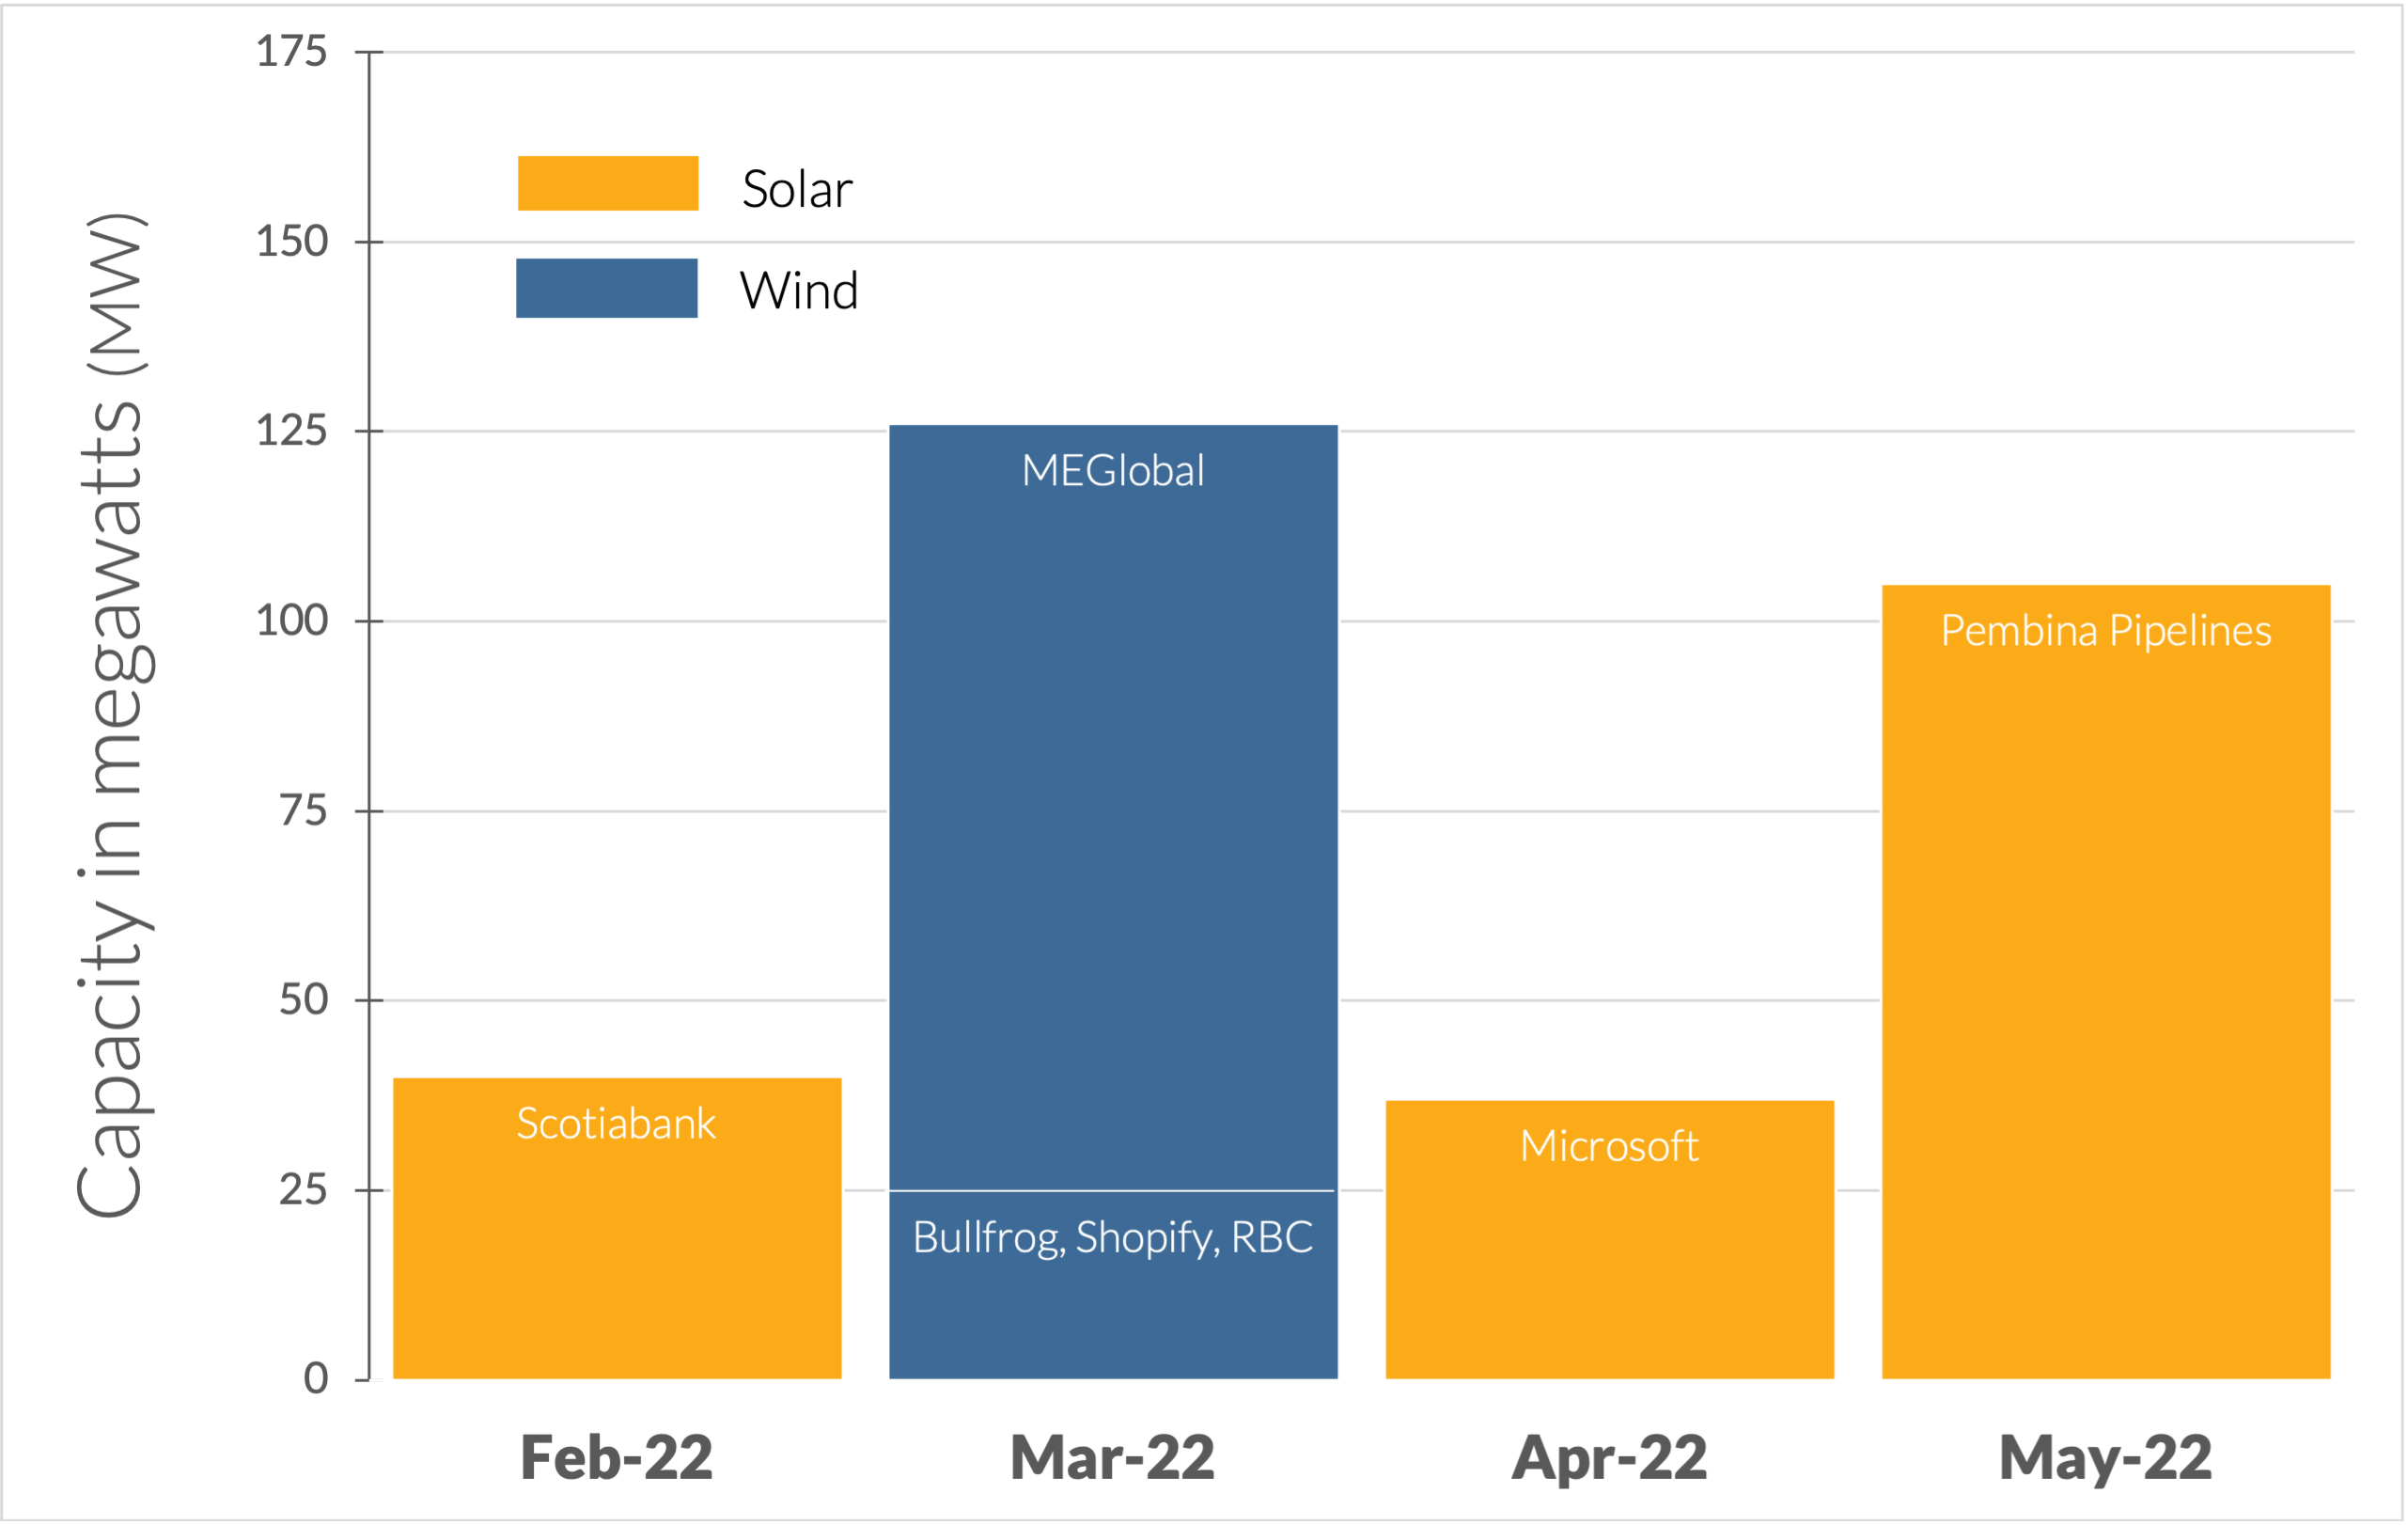 Barchart showing megawatt capacity of deals made so far in 2022. Feb: Scotiabank, ~35 MW; Mar: Bullfrog, Shopify and RBC, 25 MW, and MEGlobal, 125 MW; Apr: ~30 MW, Microsoft; May: 105 MW, Pembina Pipelines